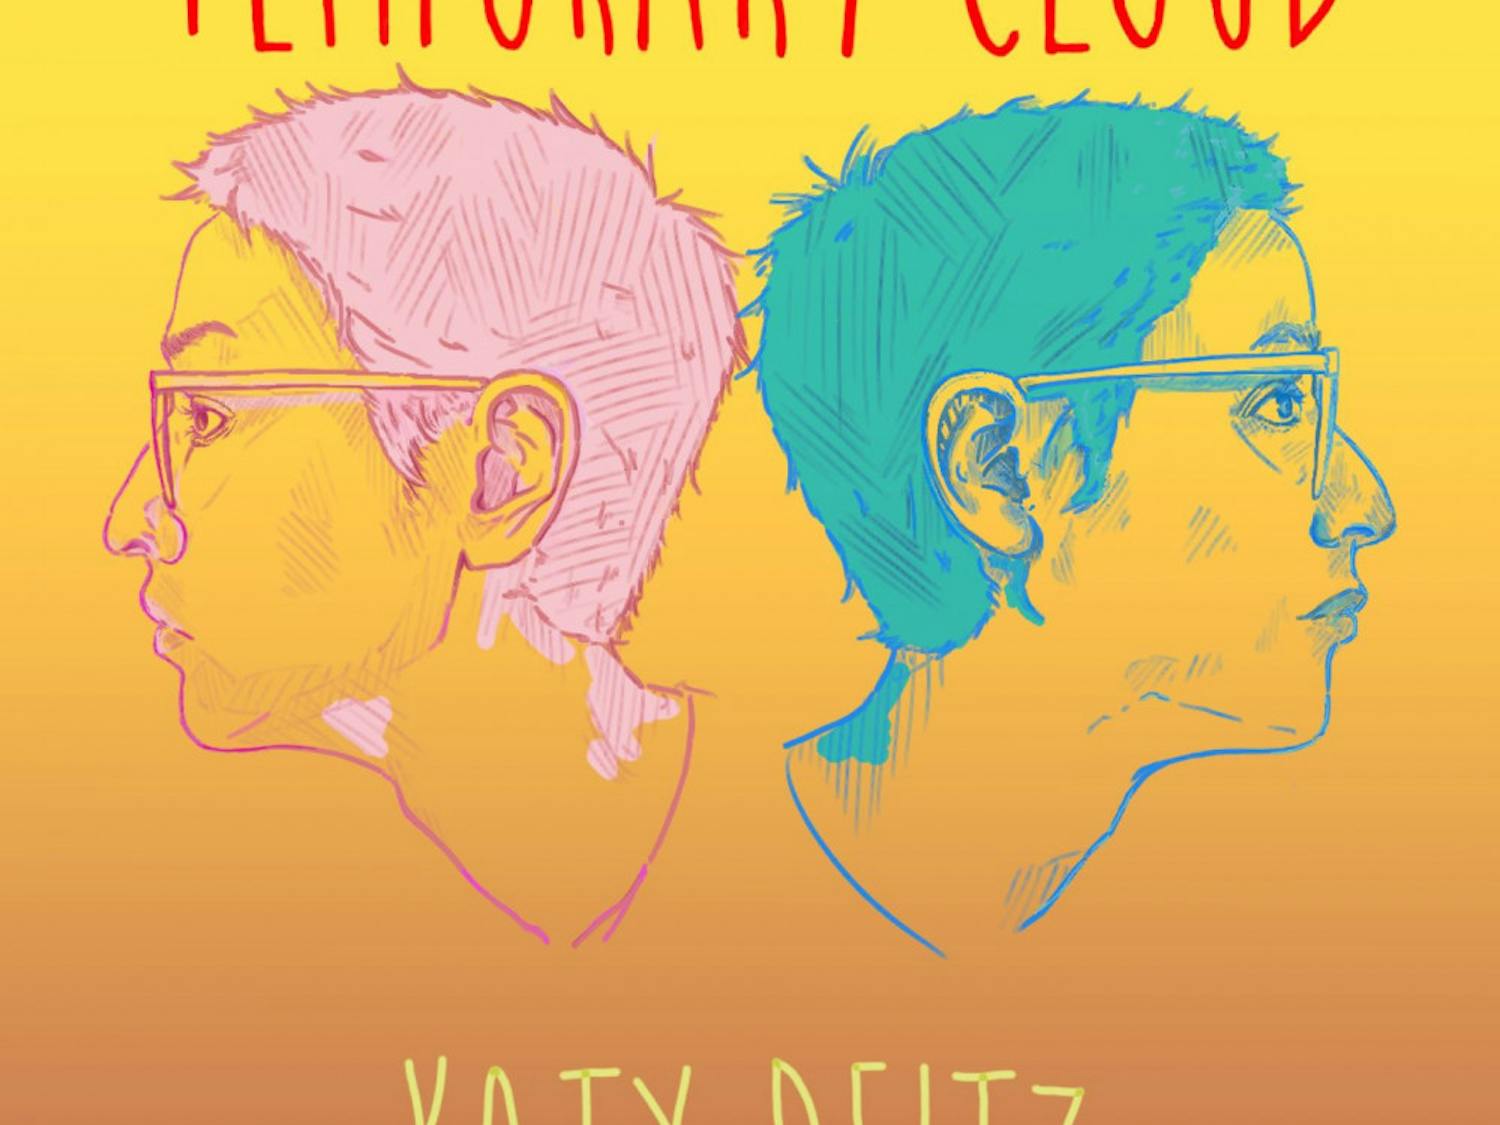 Deitz's first EP, "Temporary Clouds", is a four-track album that reflects on times of hardships and reminds audiences that the bad things in life won't last forever.